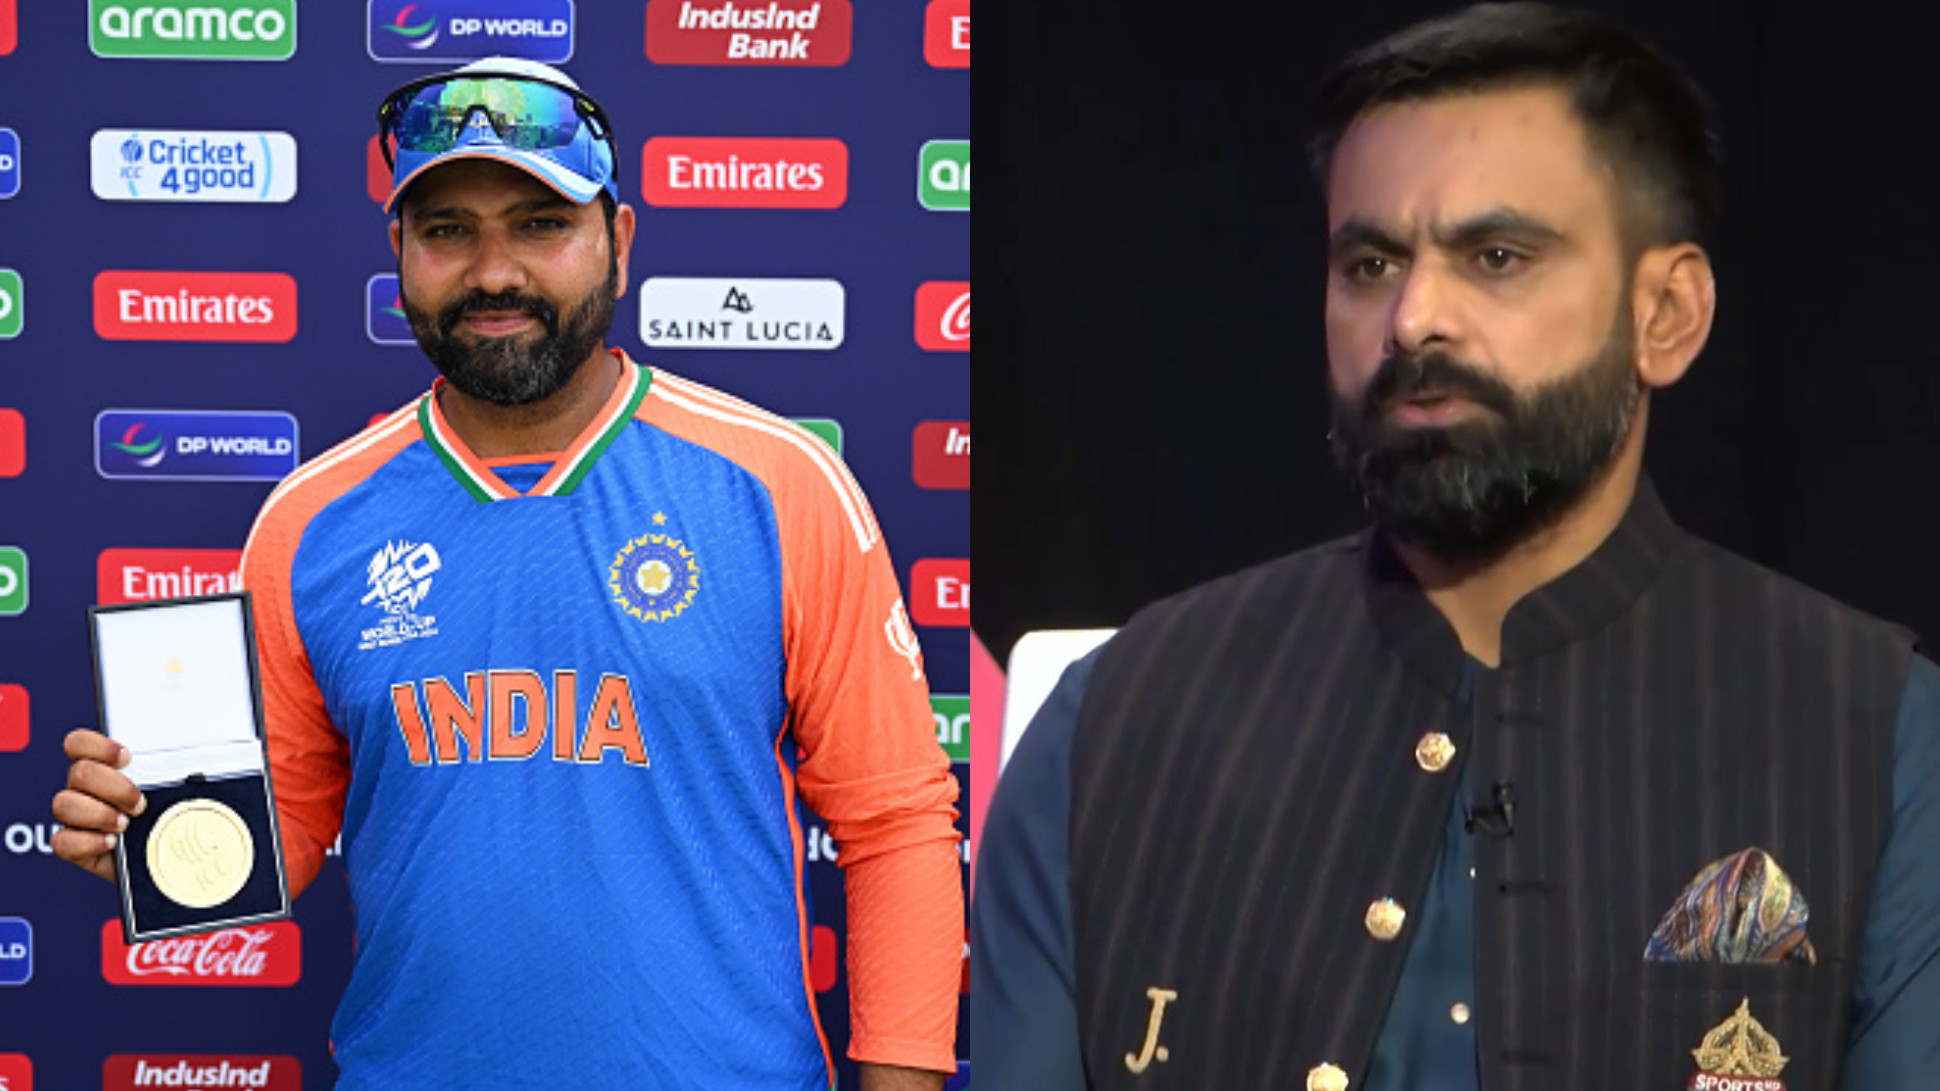 WATCH- ‘Rohit Sharma deserves to win this T20 World Cup’- Mohammed Hafeez